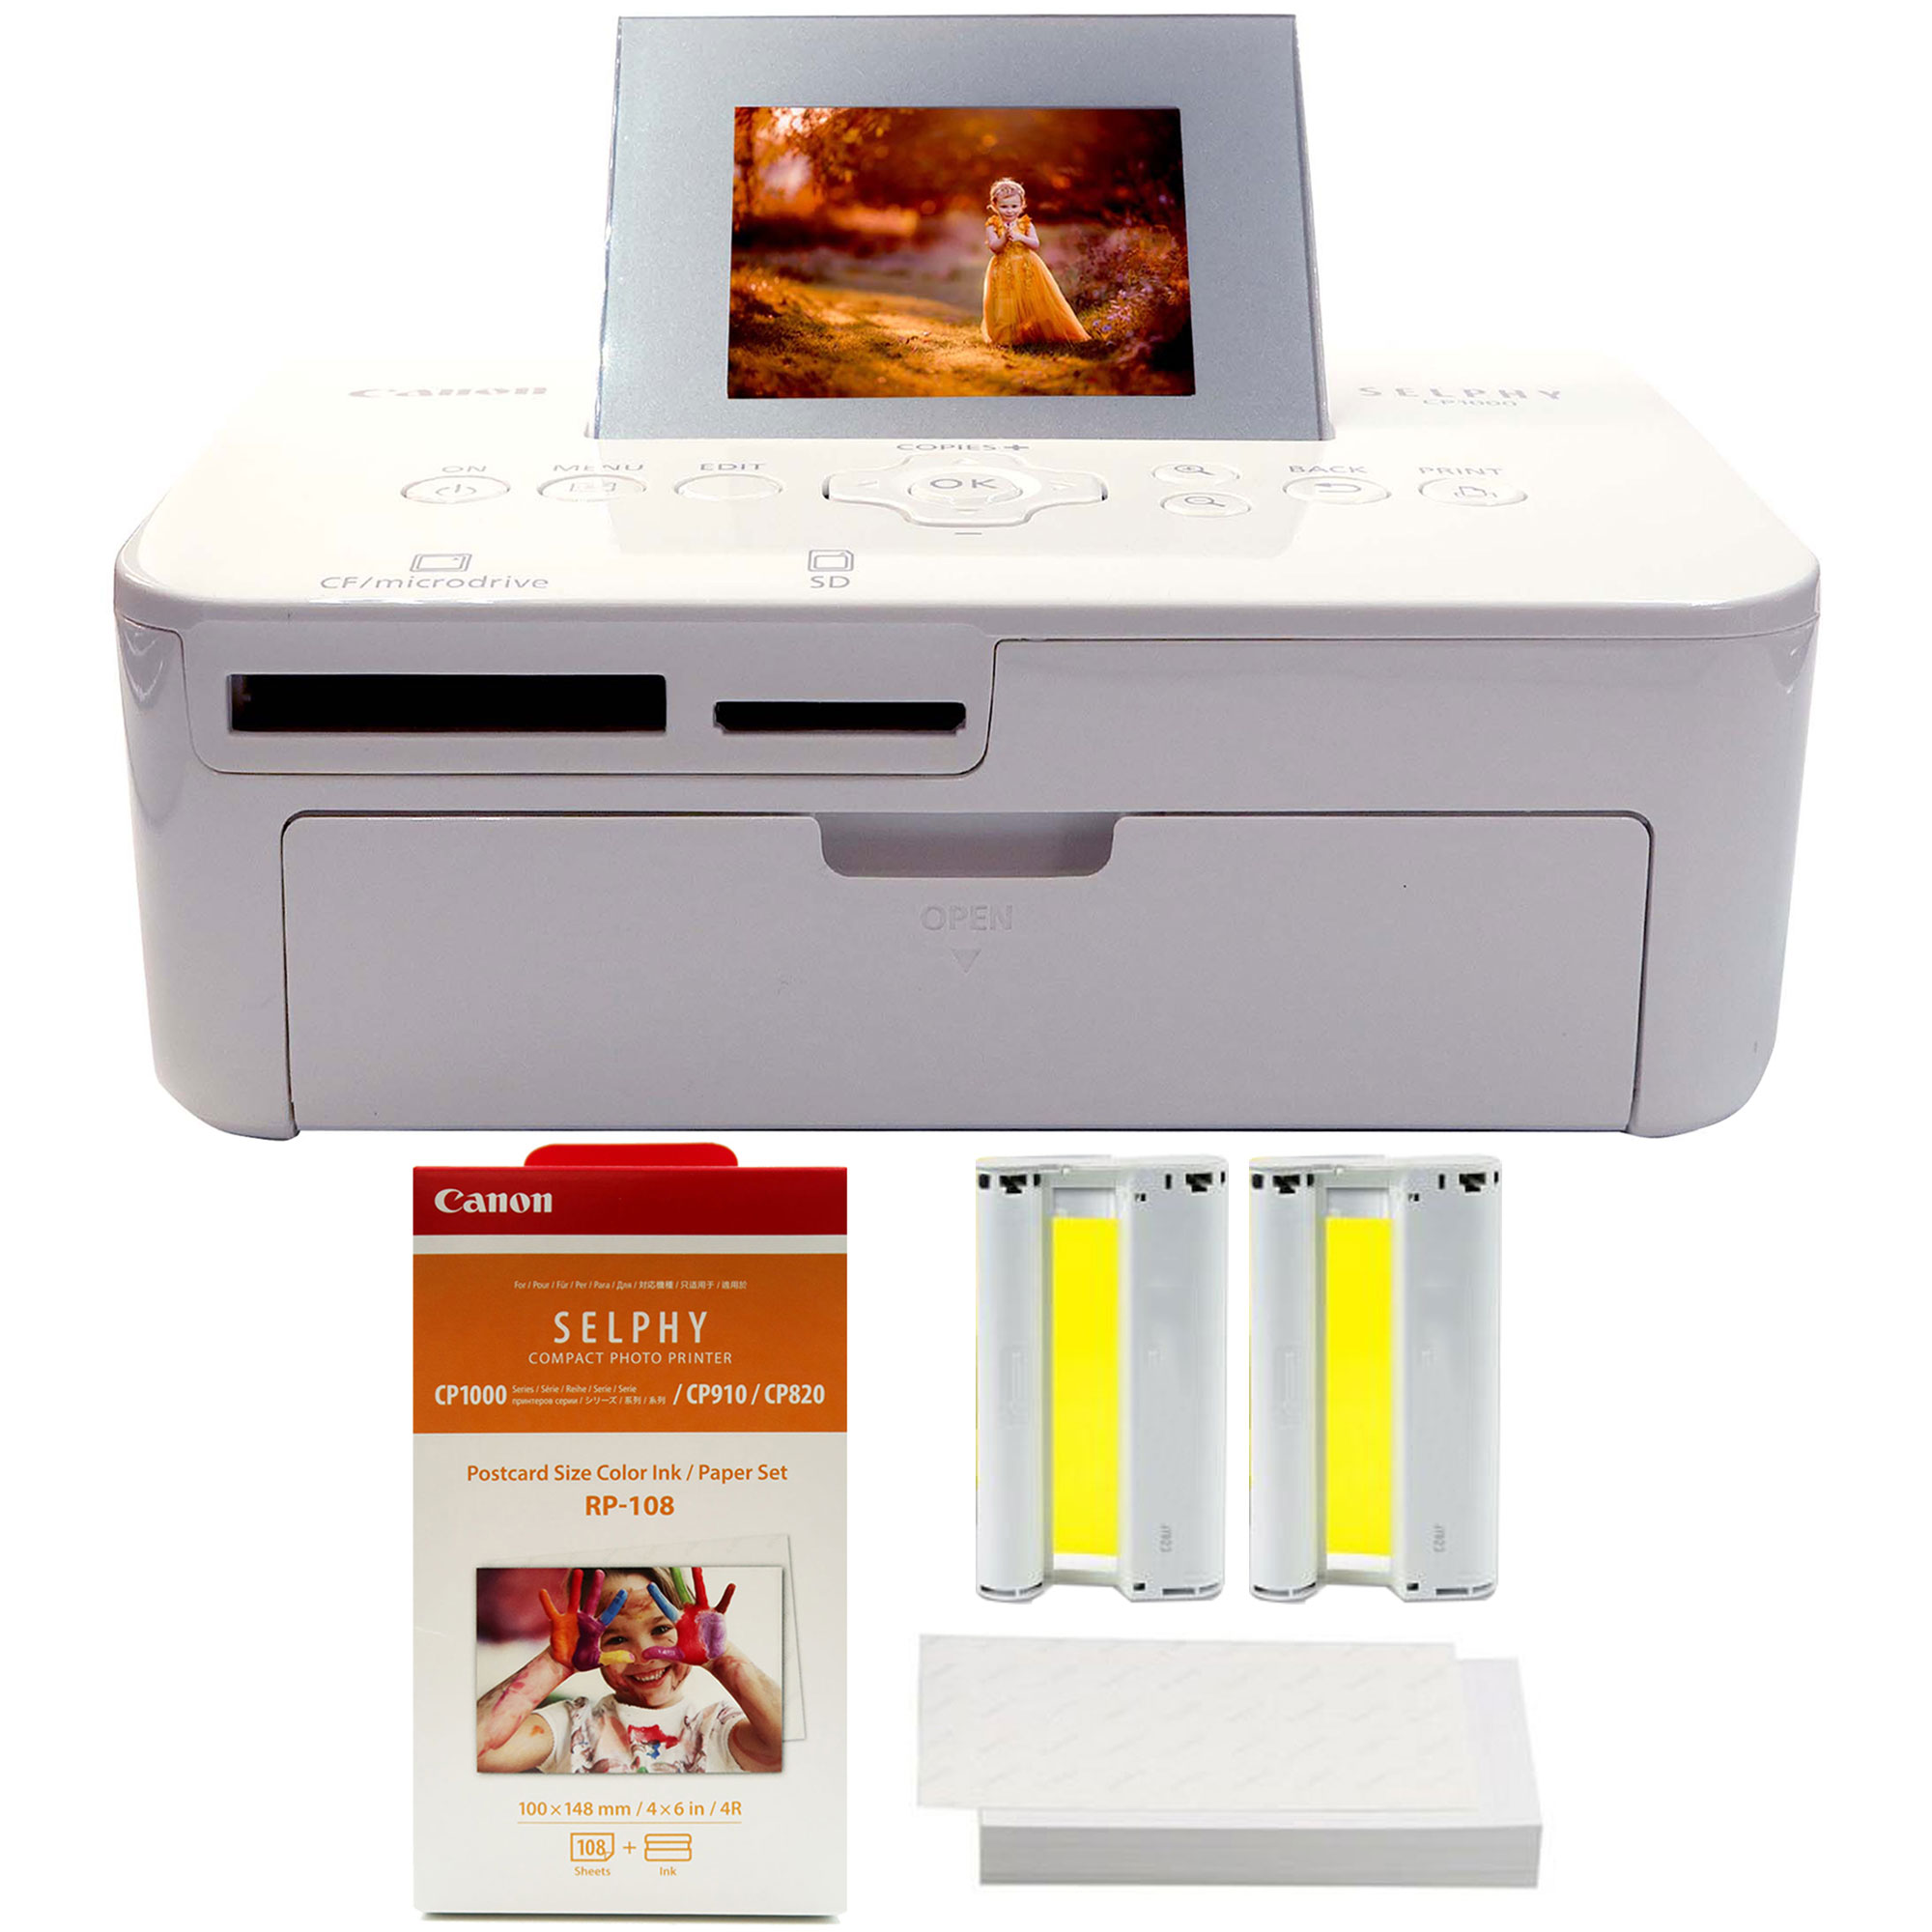 Canon Selphy Cp1000 Compact Photo Printer White With Canon Rp 108 Ink And Paper Set 9016